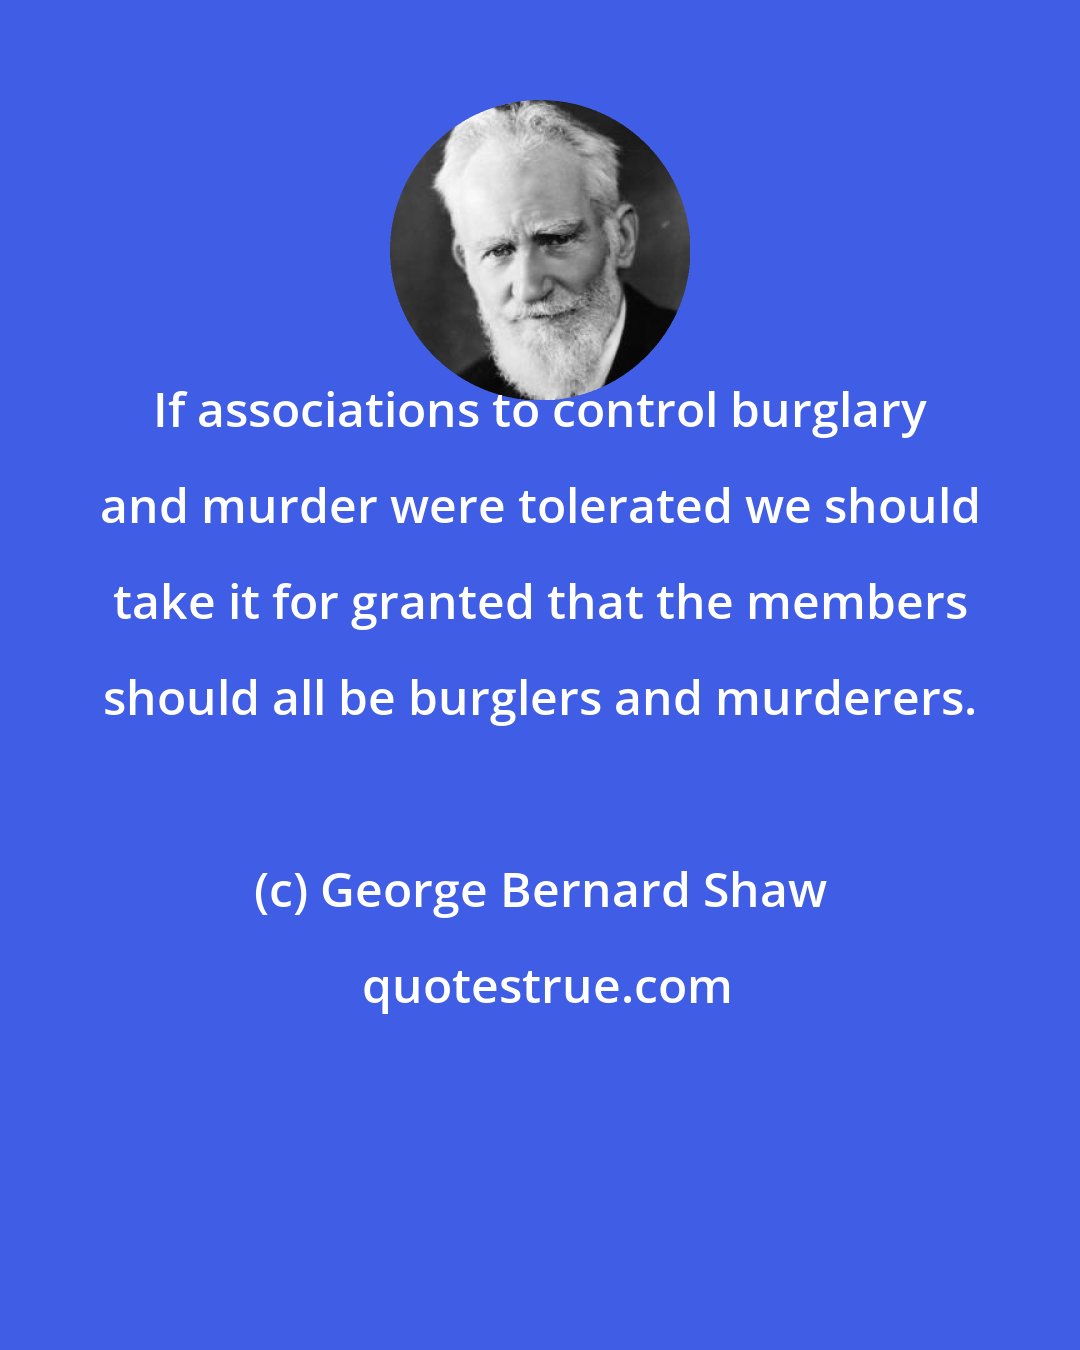 George Bernard Shaw: If associations to control burglary and murder were tolerated we should take it for granted that the members should all be burglers and murderers.